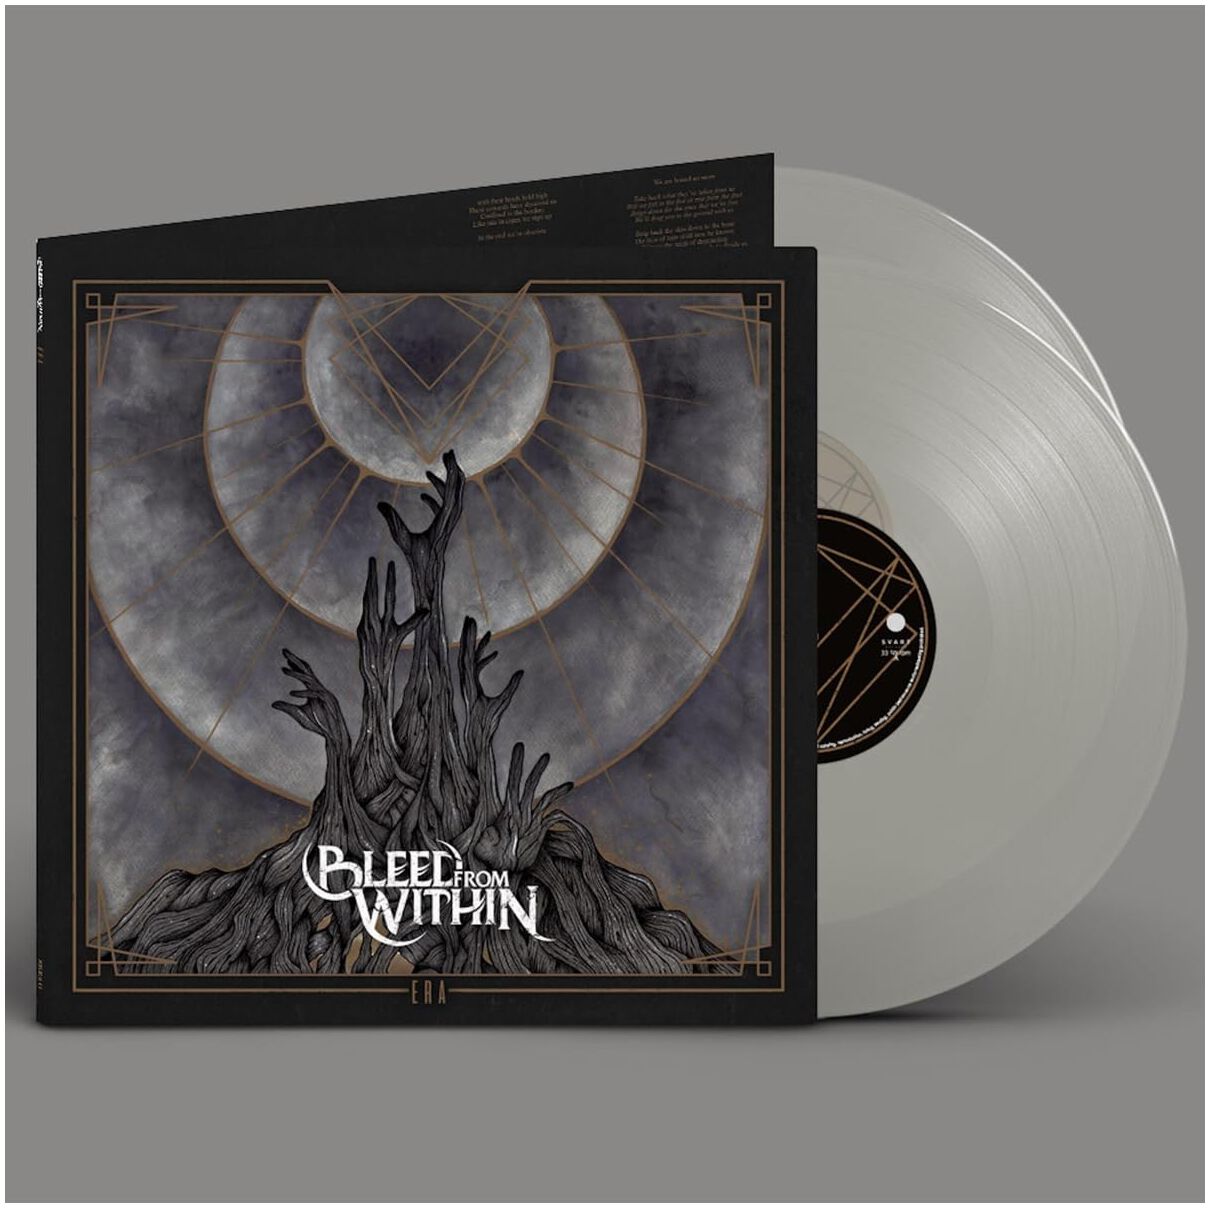 Bleed From Within Era LP multicolor